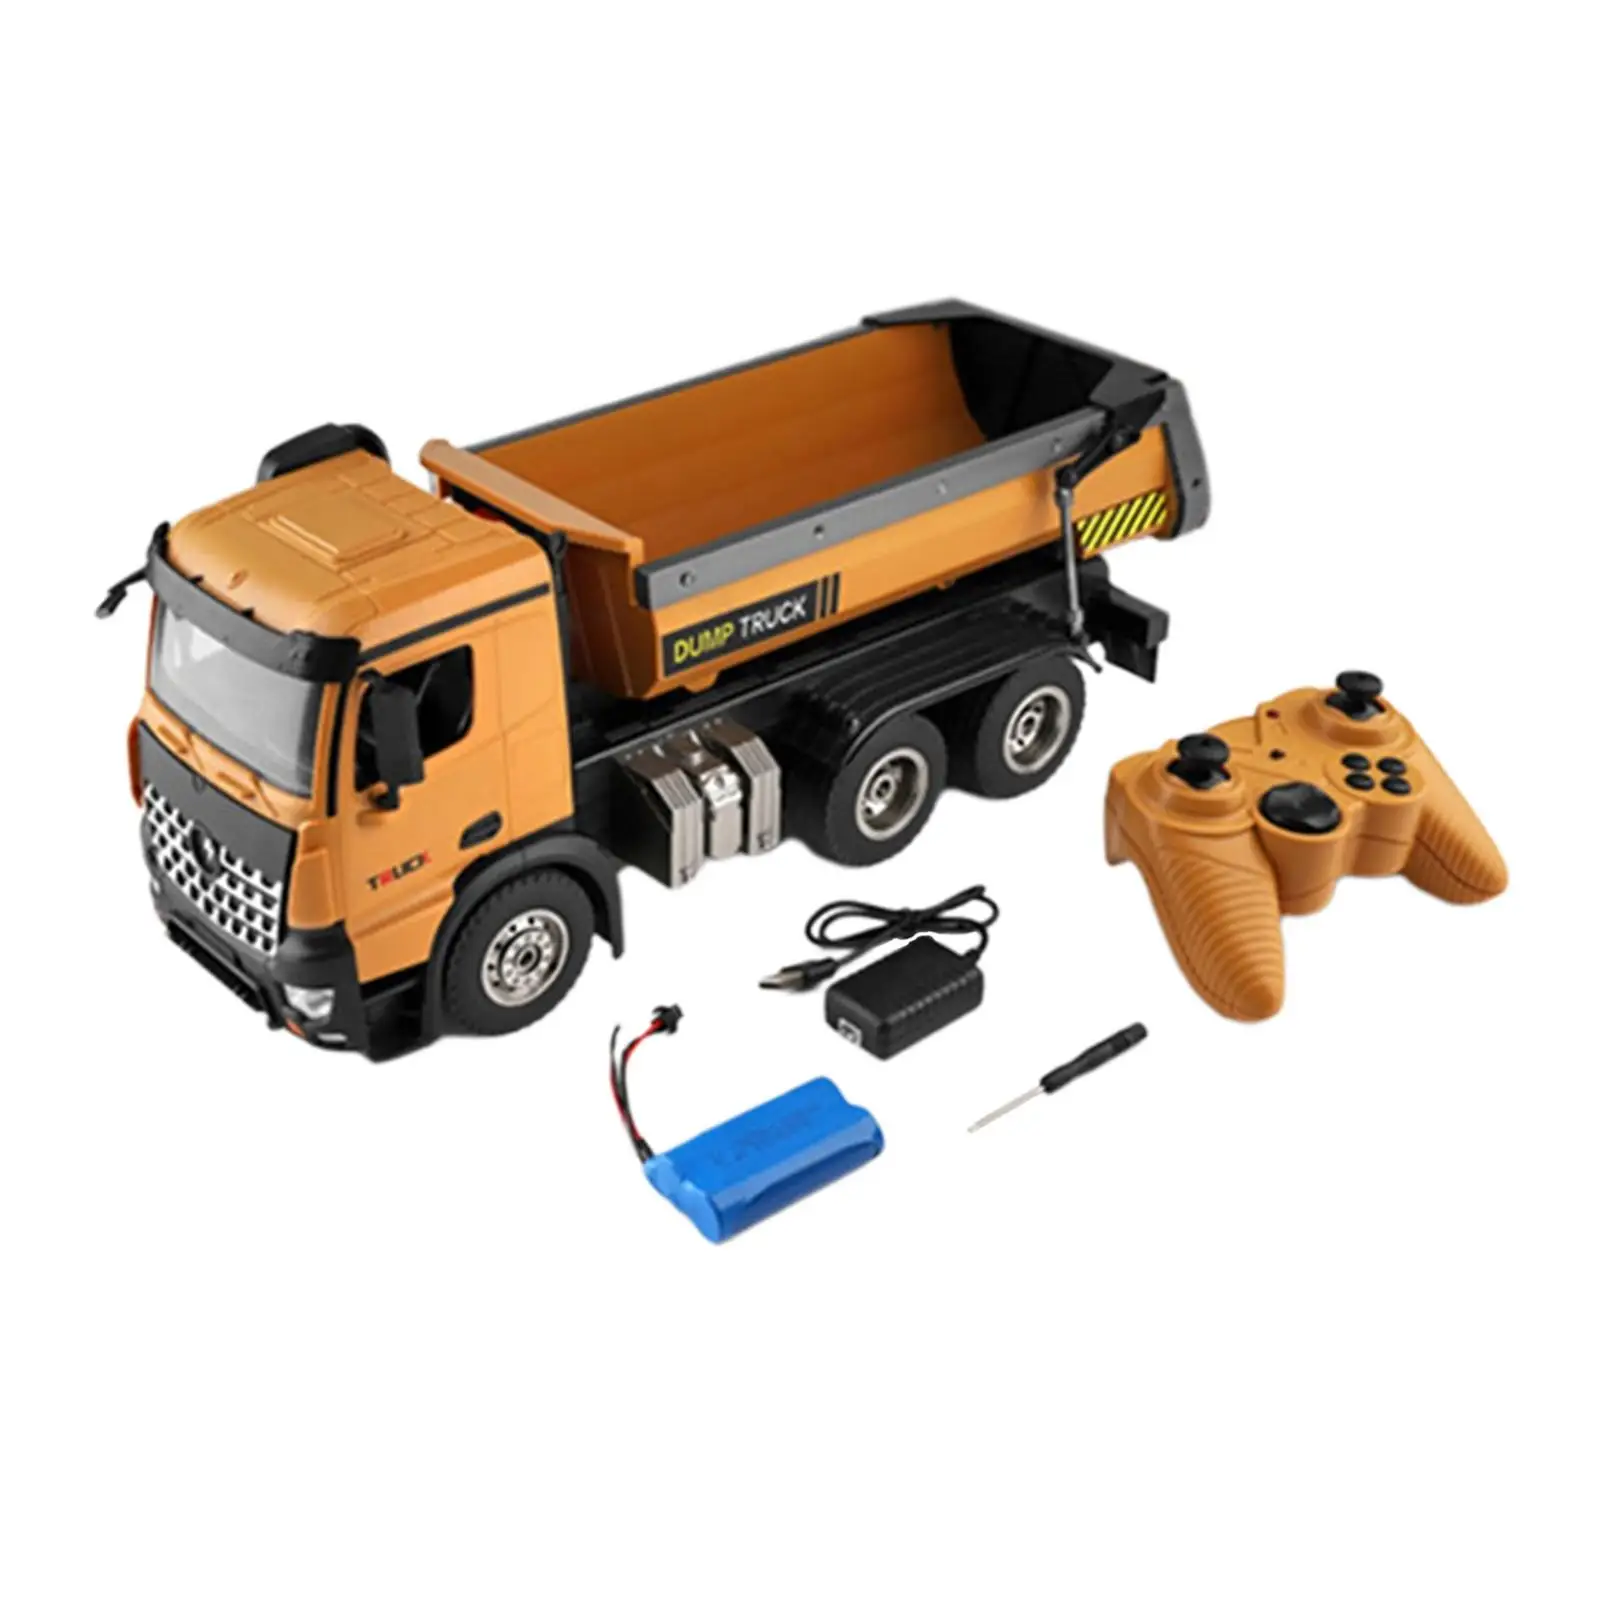  14600 Rechargeable Remote Controlled Dump Truck Toy for Kids